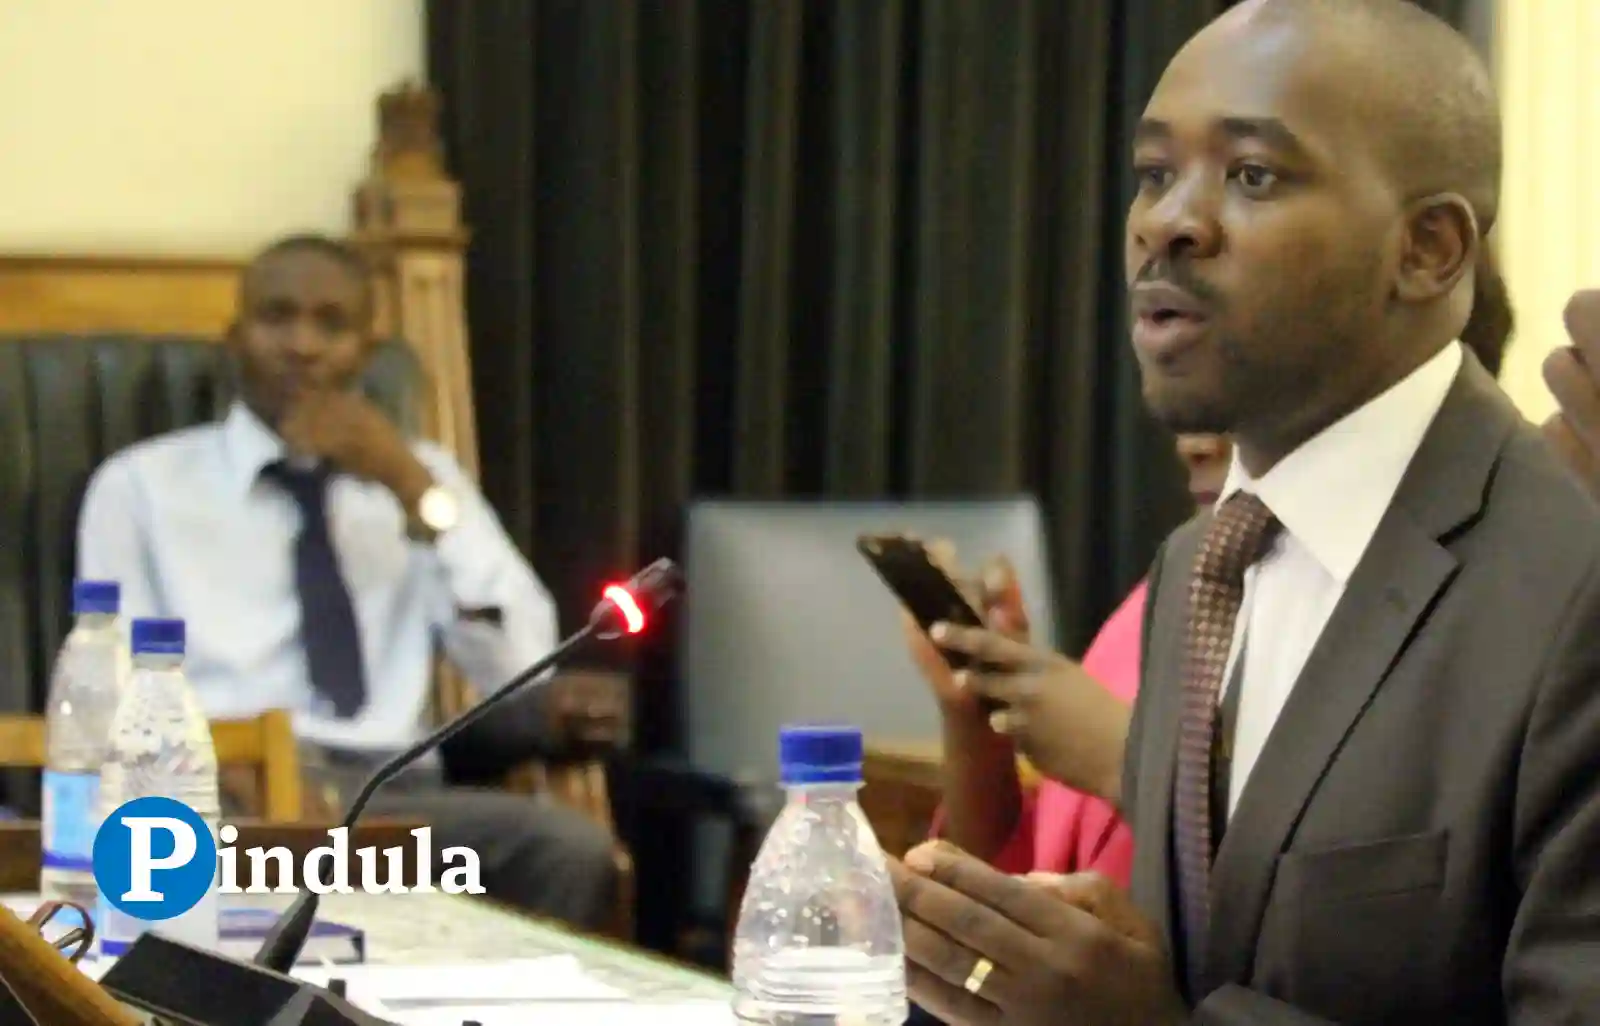 UPDATE On Chamisa’s New Car: Donations Surpass Target Of US$120K